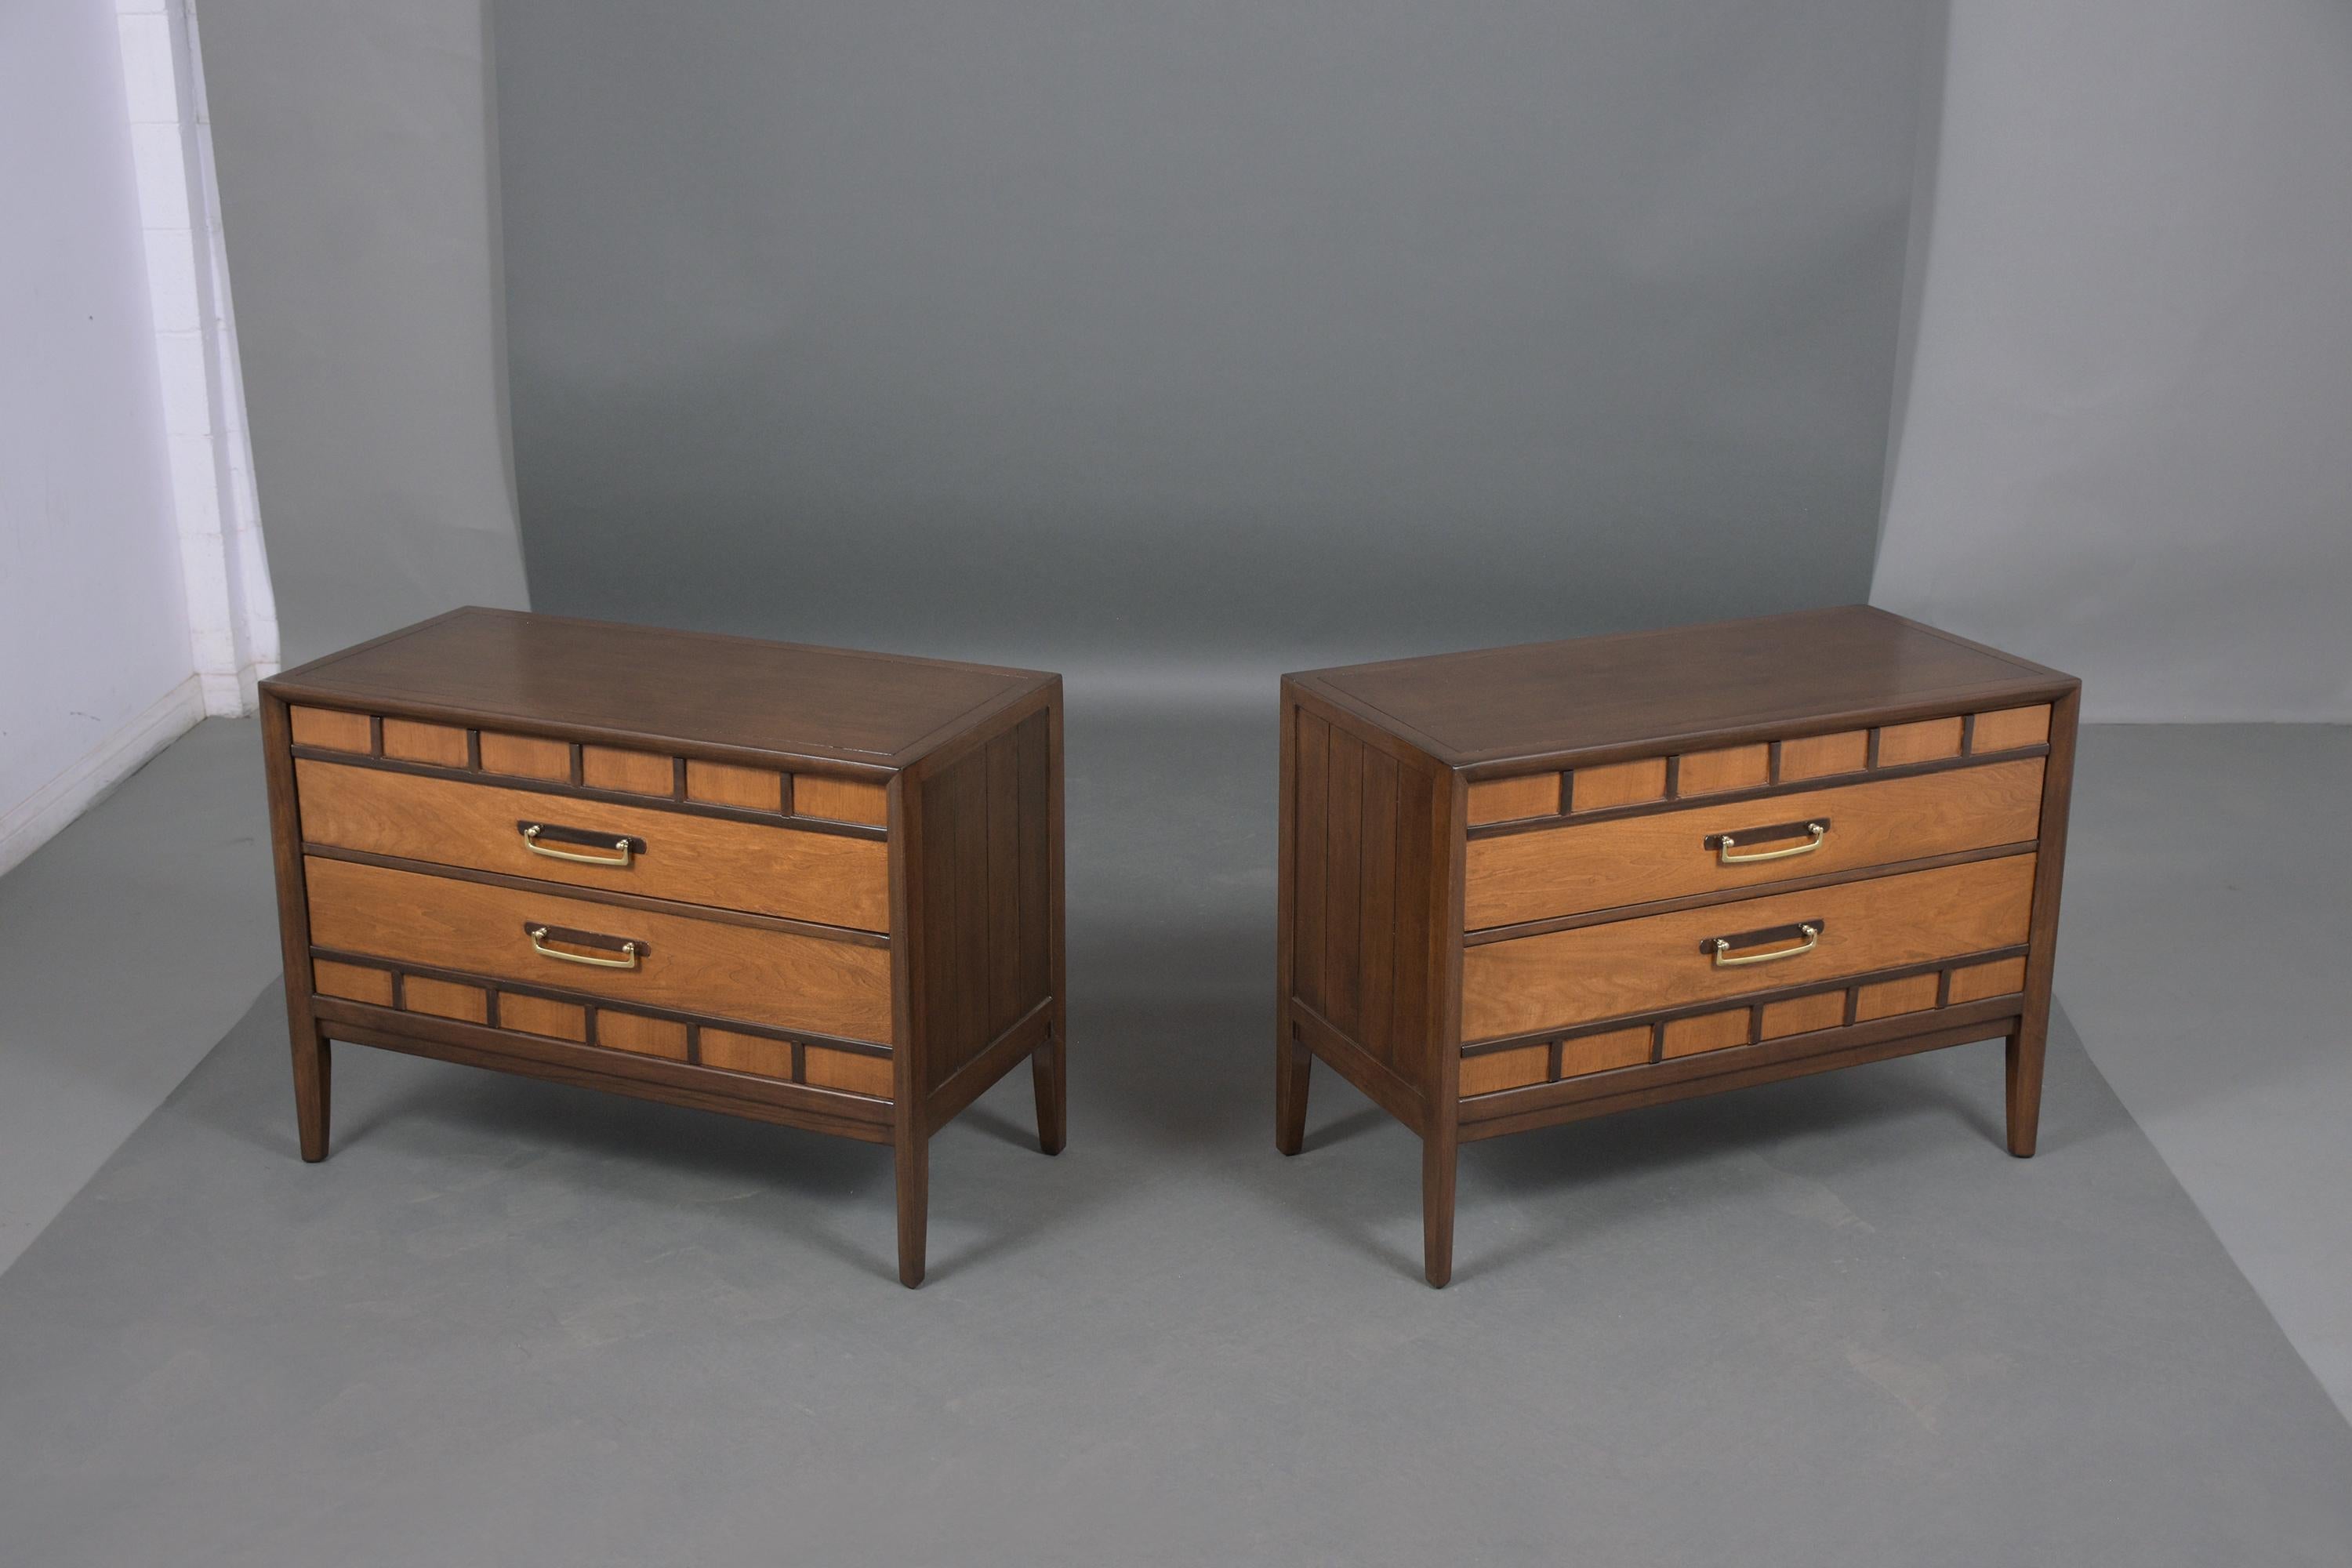 An extraordinary pair Mid-Century Modern dresser has been professionally restored, hand-crafted out of walnut newly stained in dark walnut and Provincial color combination with a lacquer finish. This pair features two drawers brass drop handles,